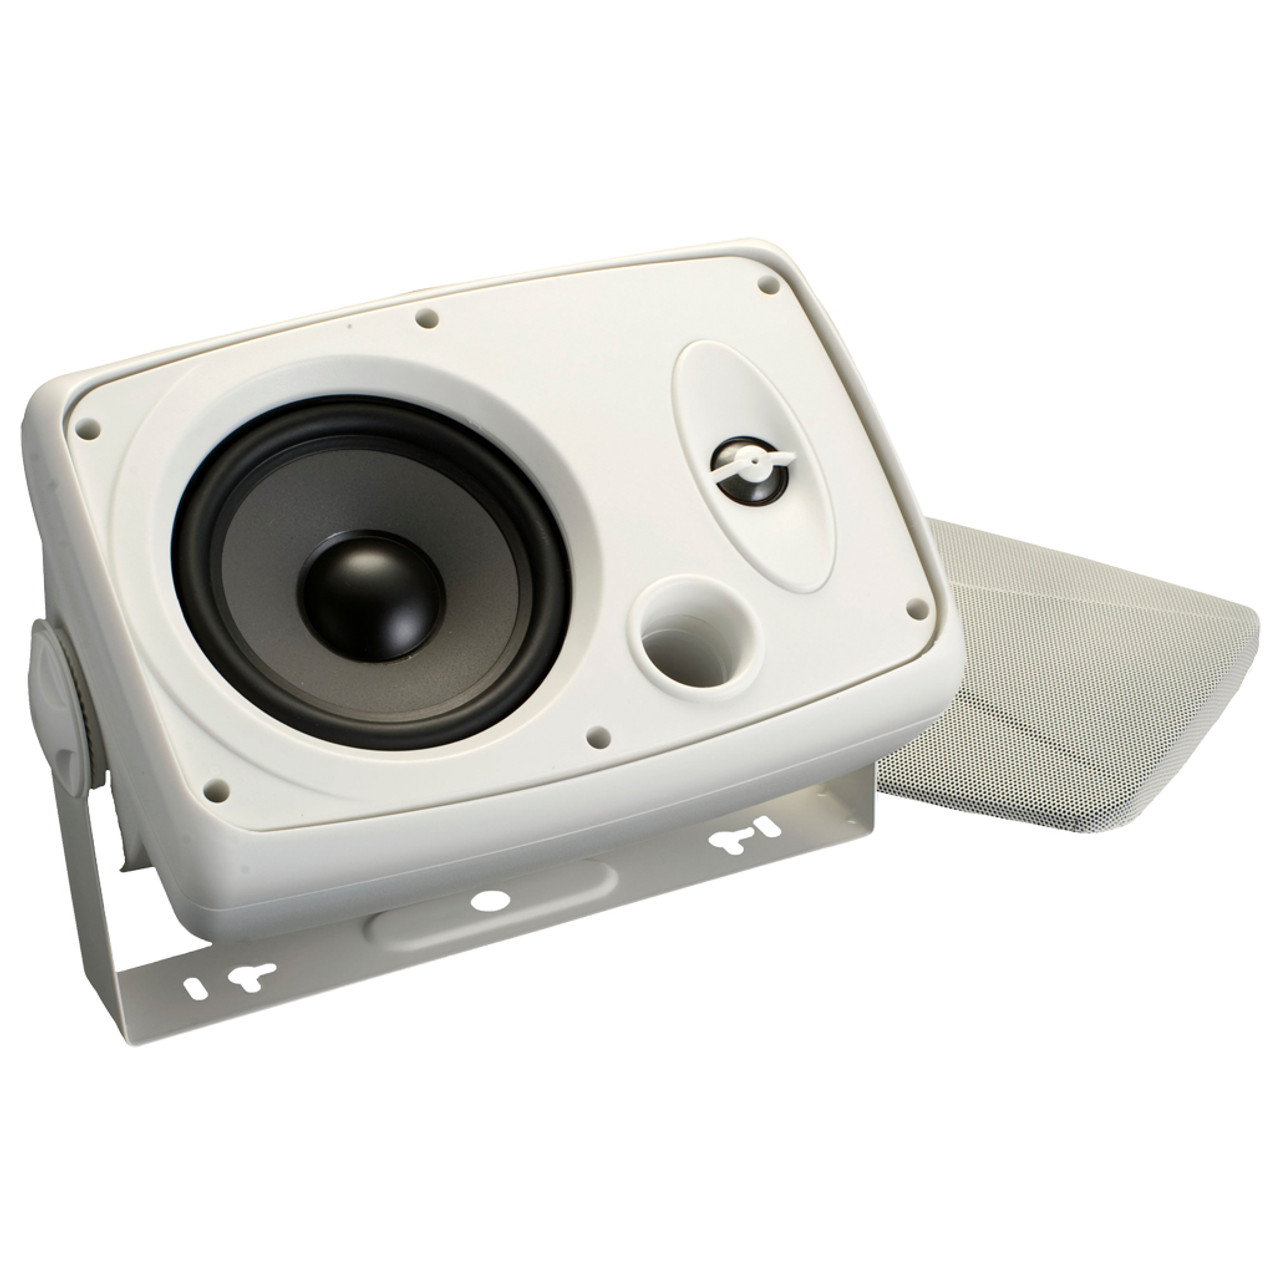 4 inch ABS Wall-Mounted Speaker (B03)